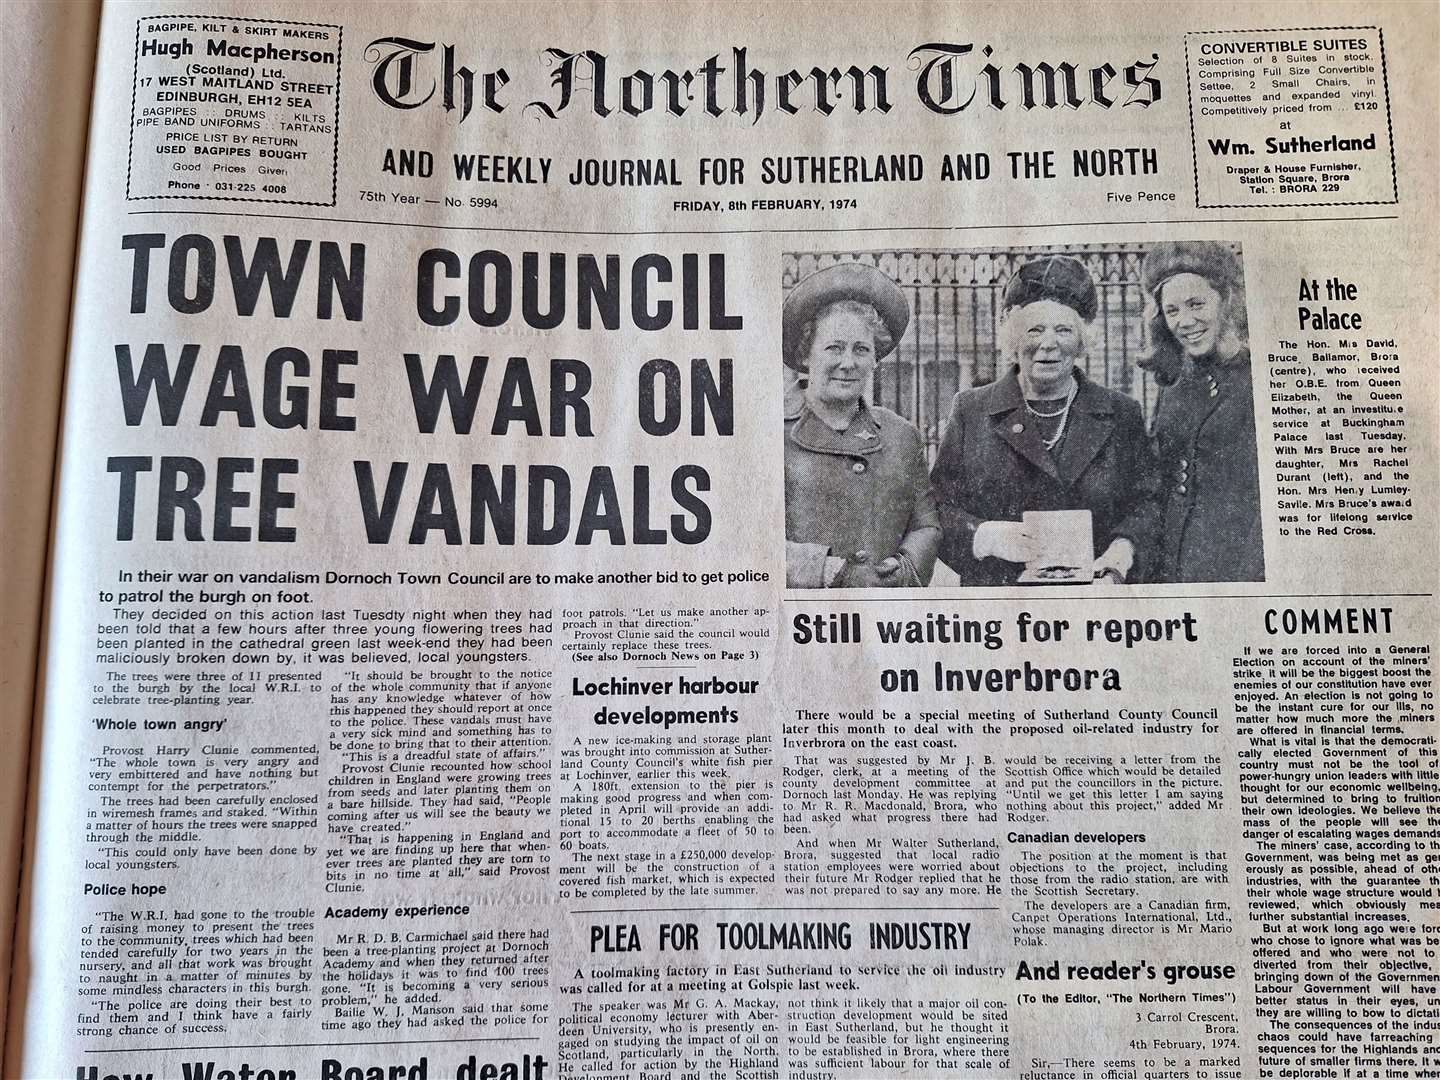 The edition of February 8, 1974.